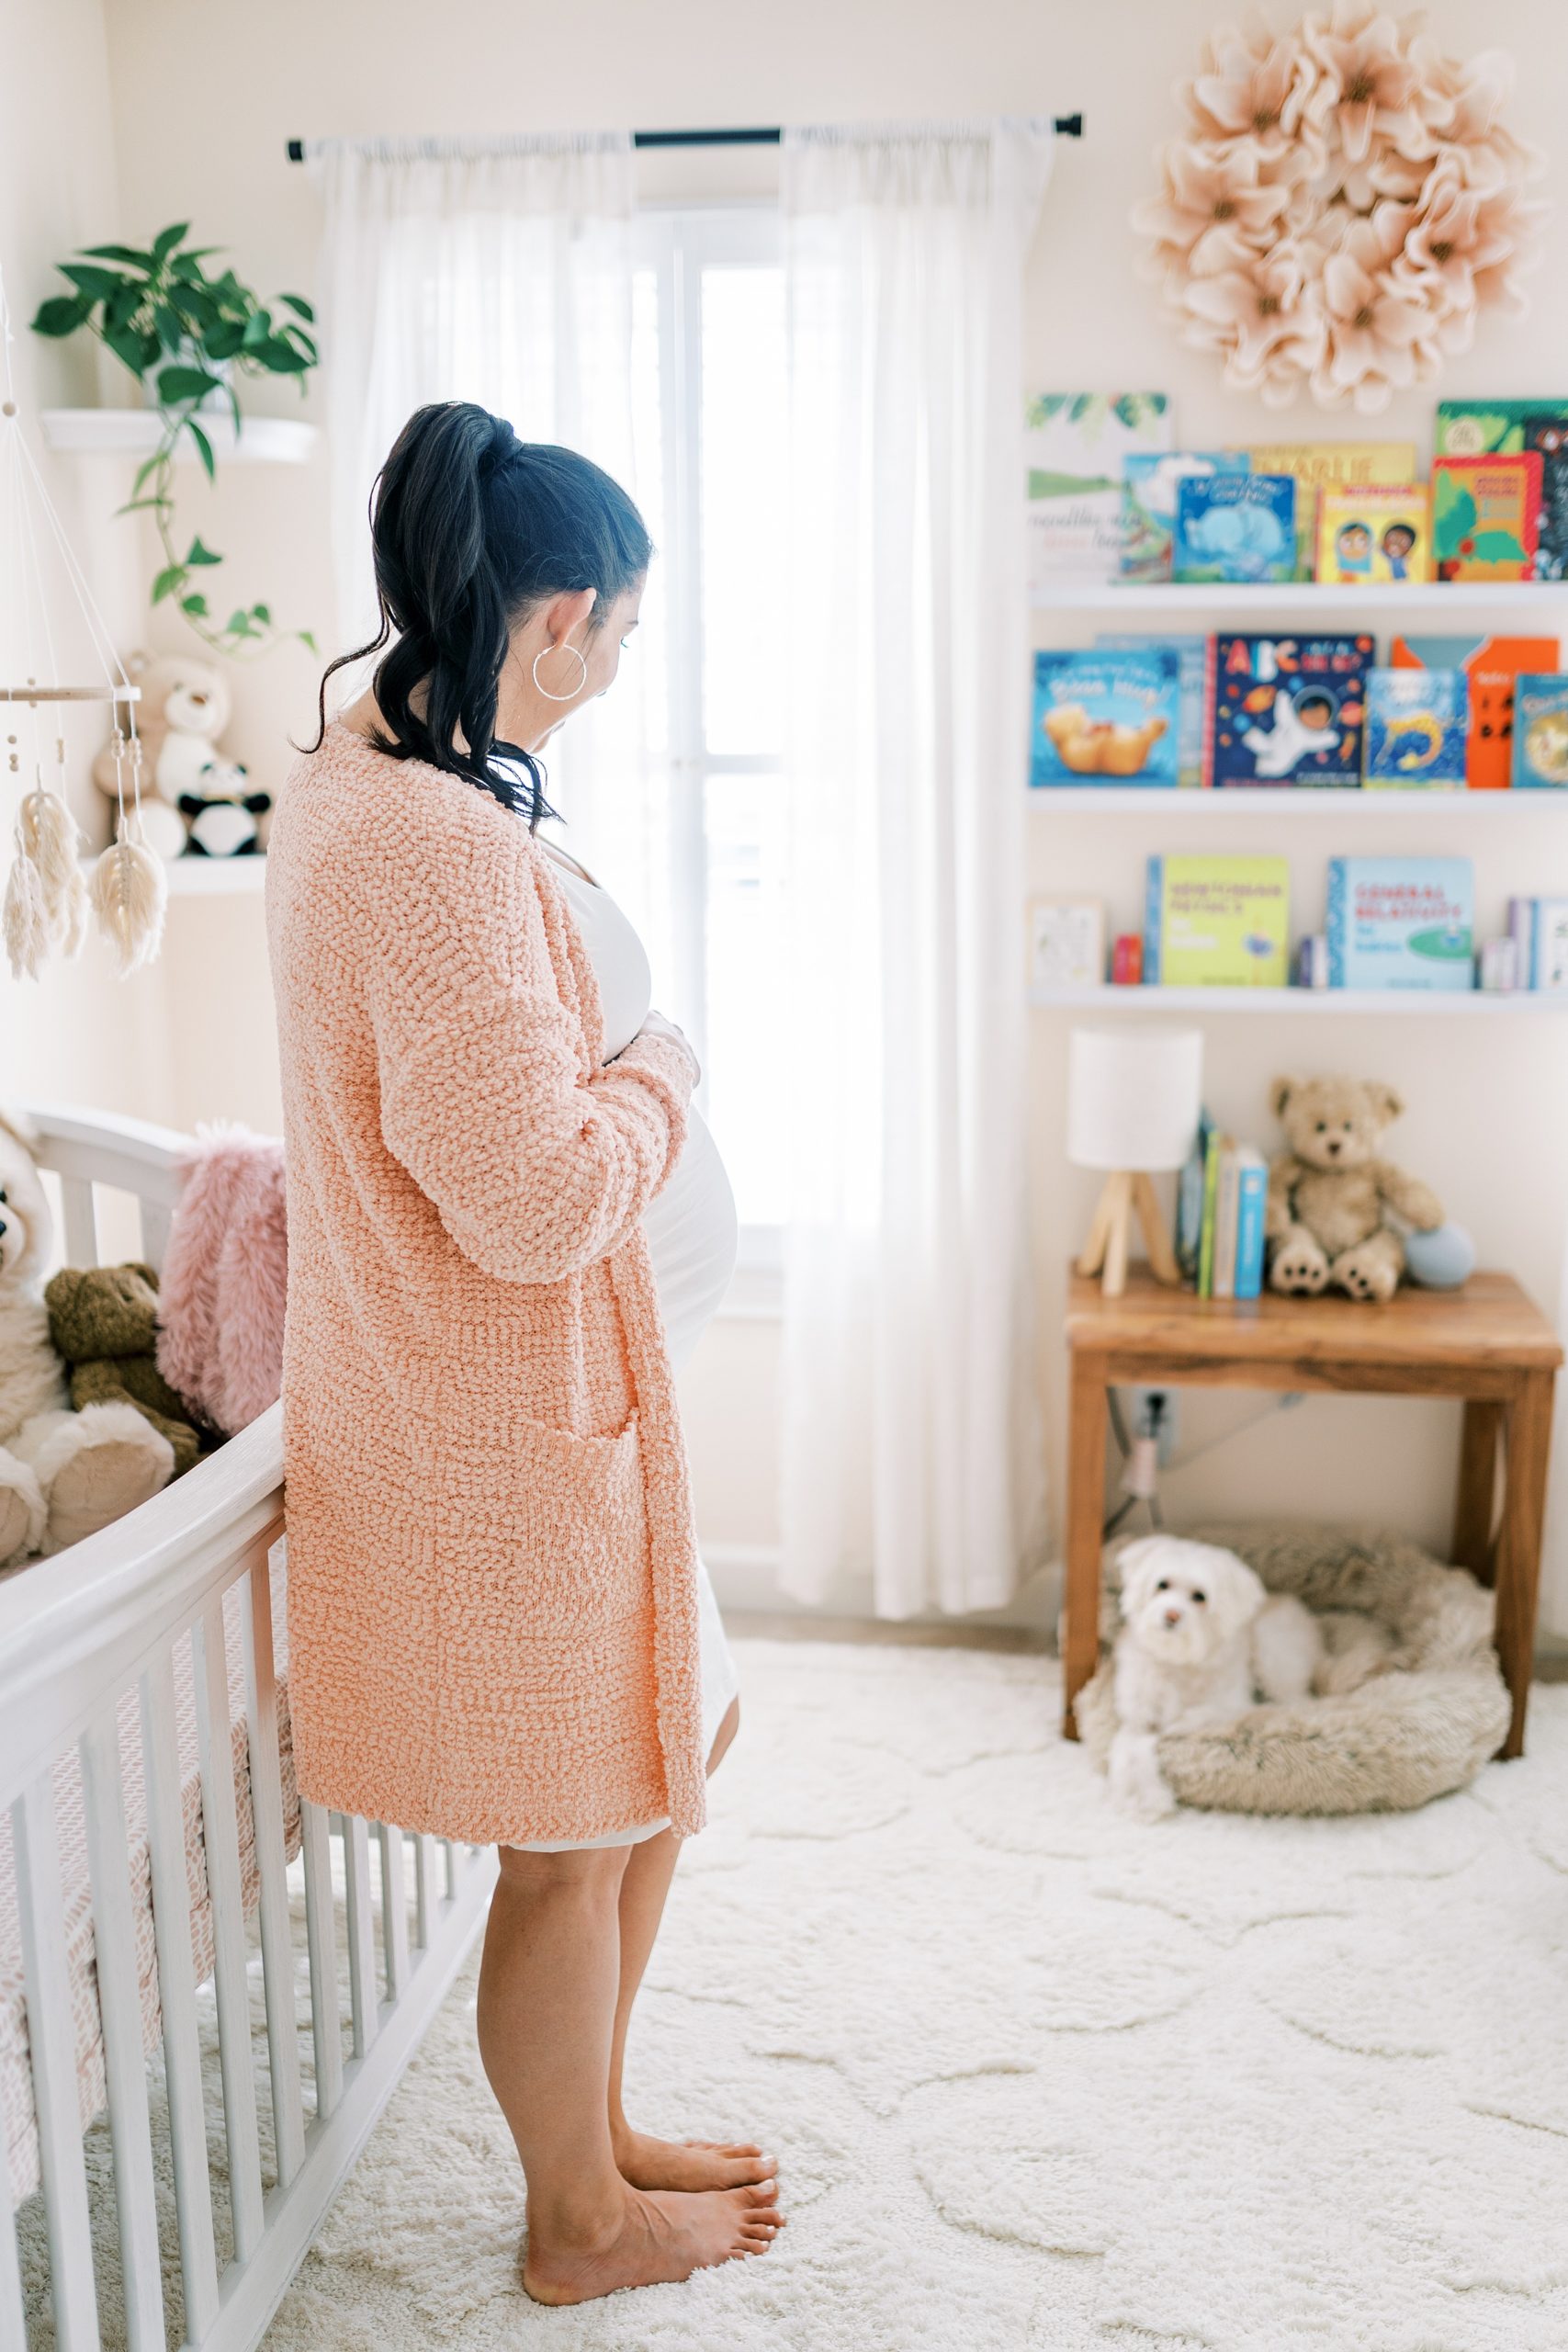 Mama in baby girls light and airy nursery during maternity photos